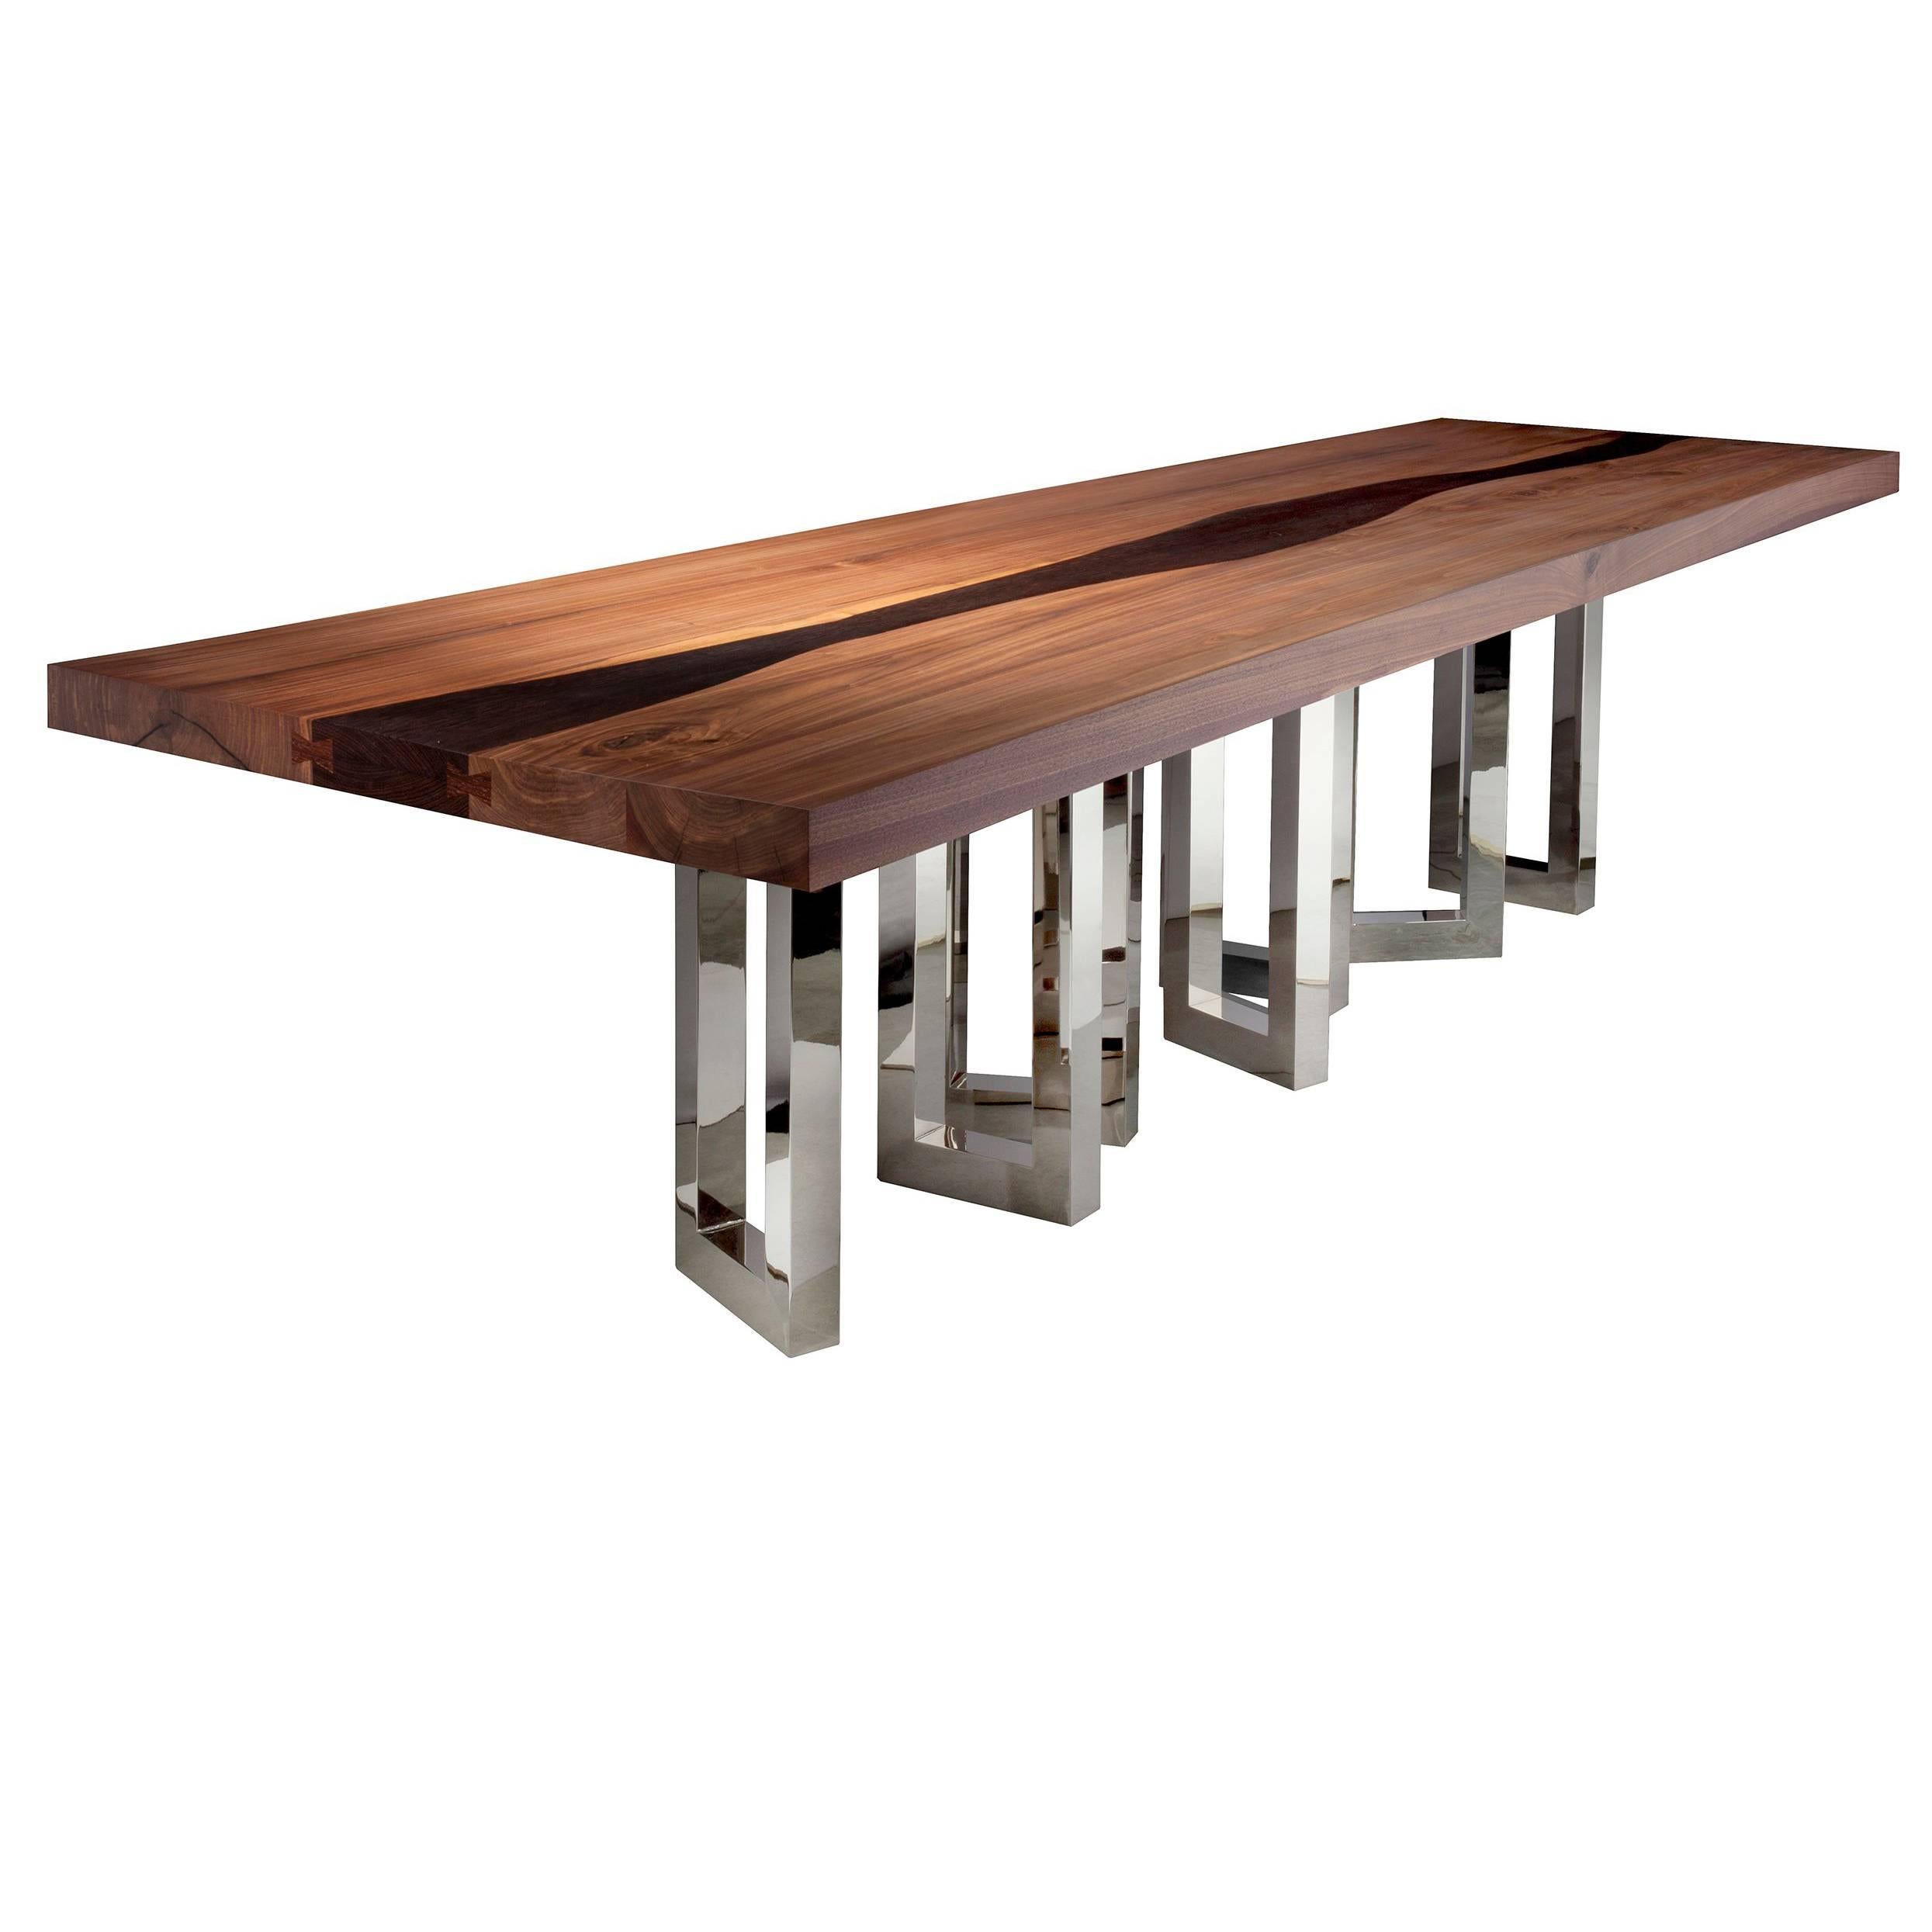 "Il Pezzo 6 Long Table" modern river table in walnut and wenge with nickel legs